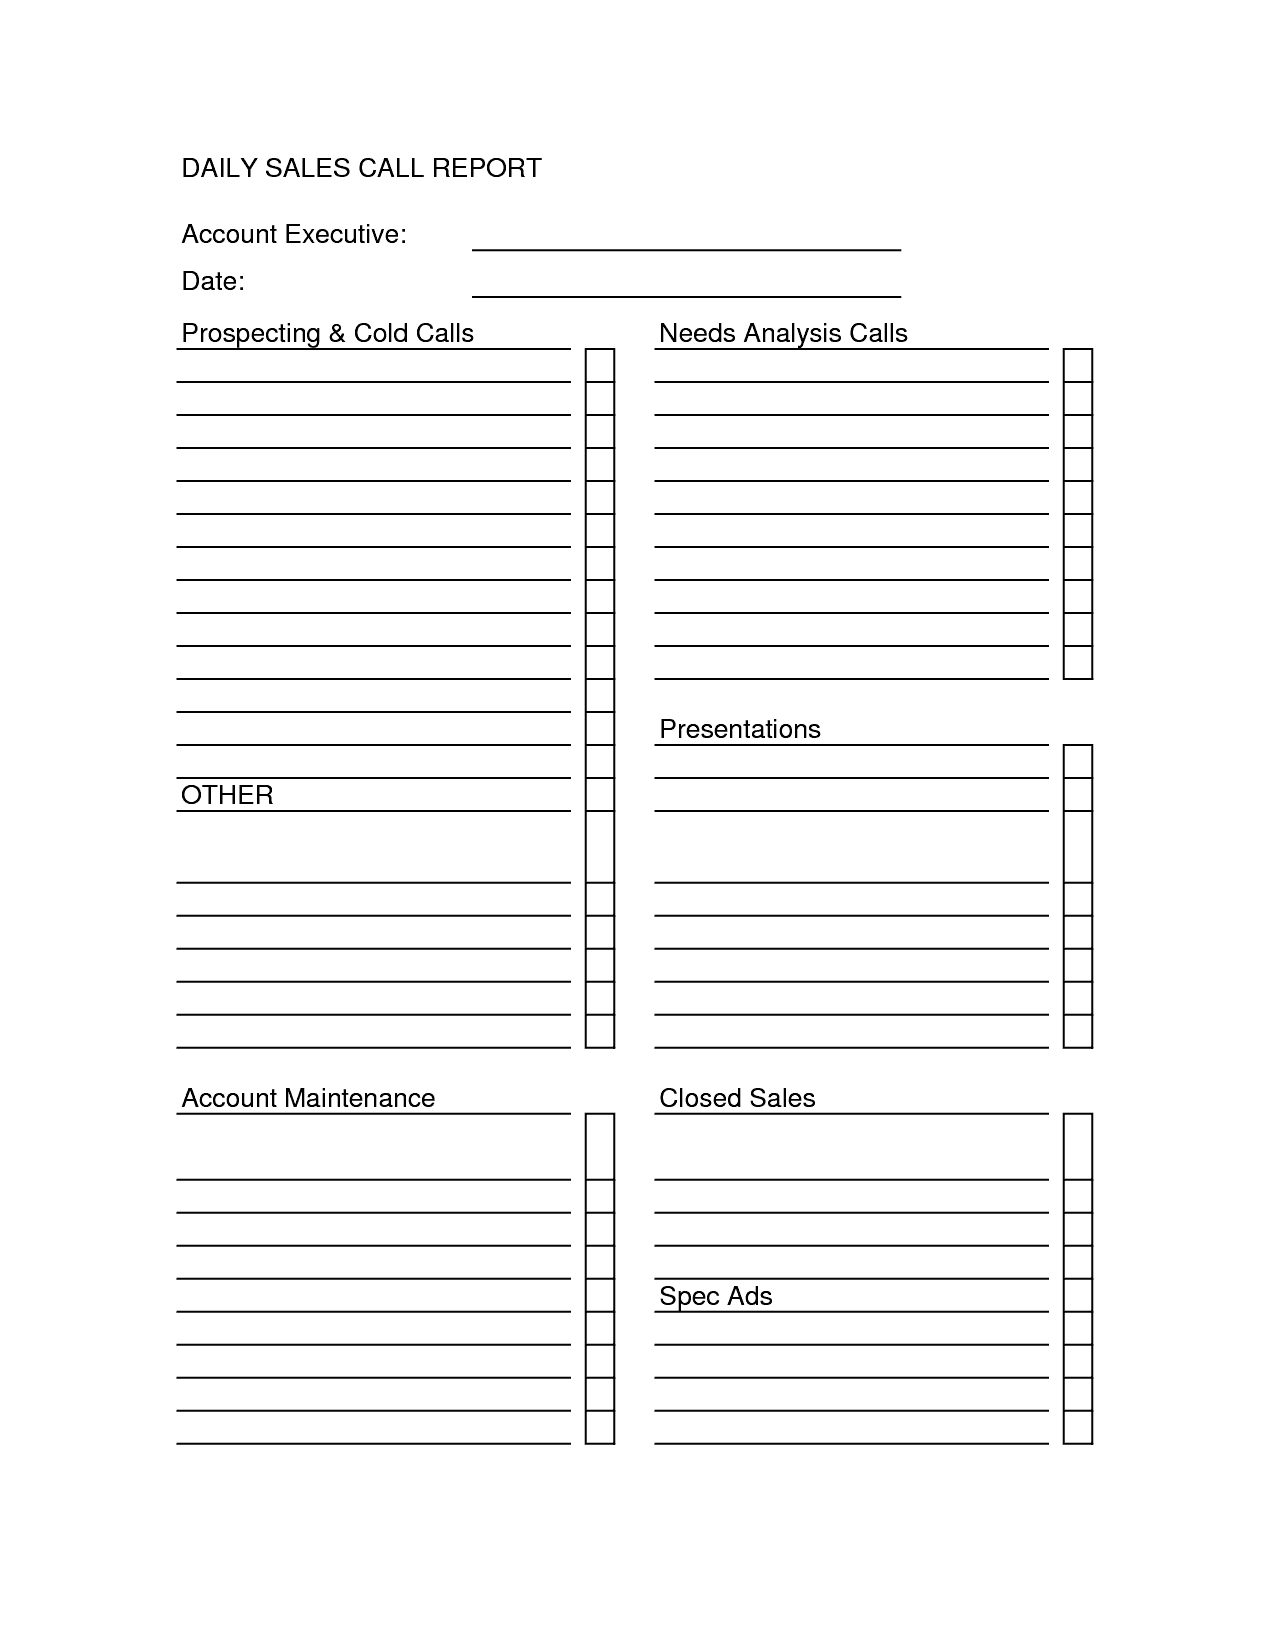 Sales Call Report Templates - Word Excel Fomats Within Sales Rep Call Report Template